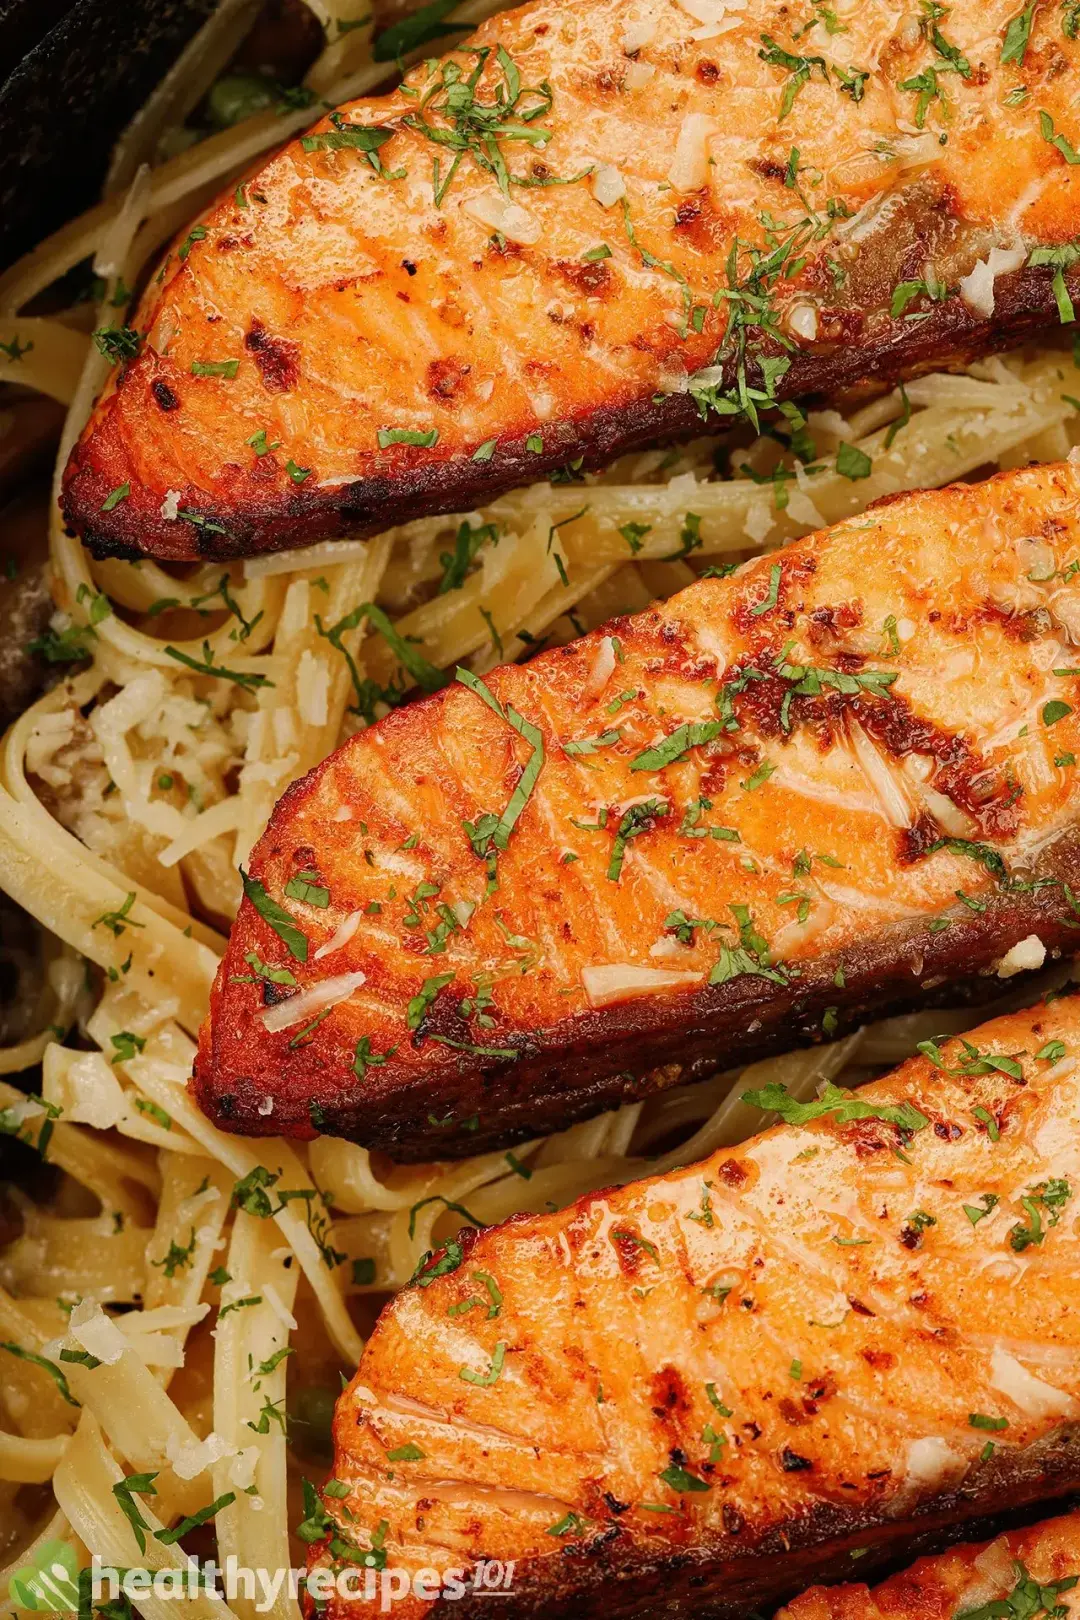 Three cooked salmon fillets with some sprinkles of chopped parsley on top laid on fettuccine pasta